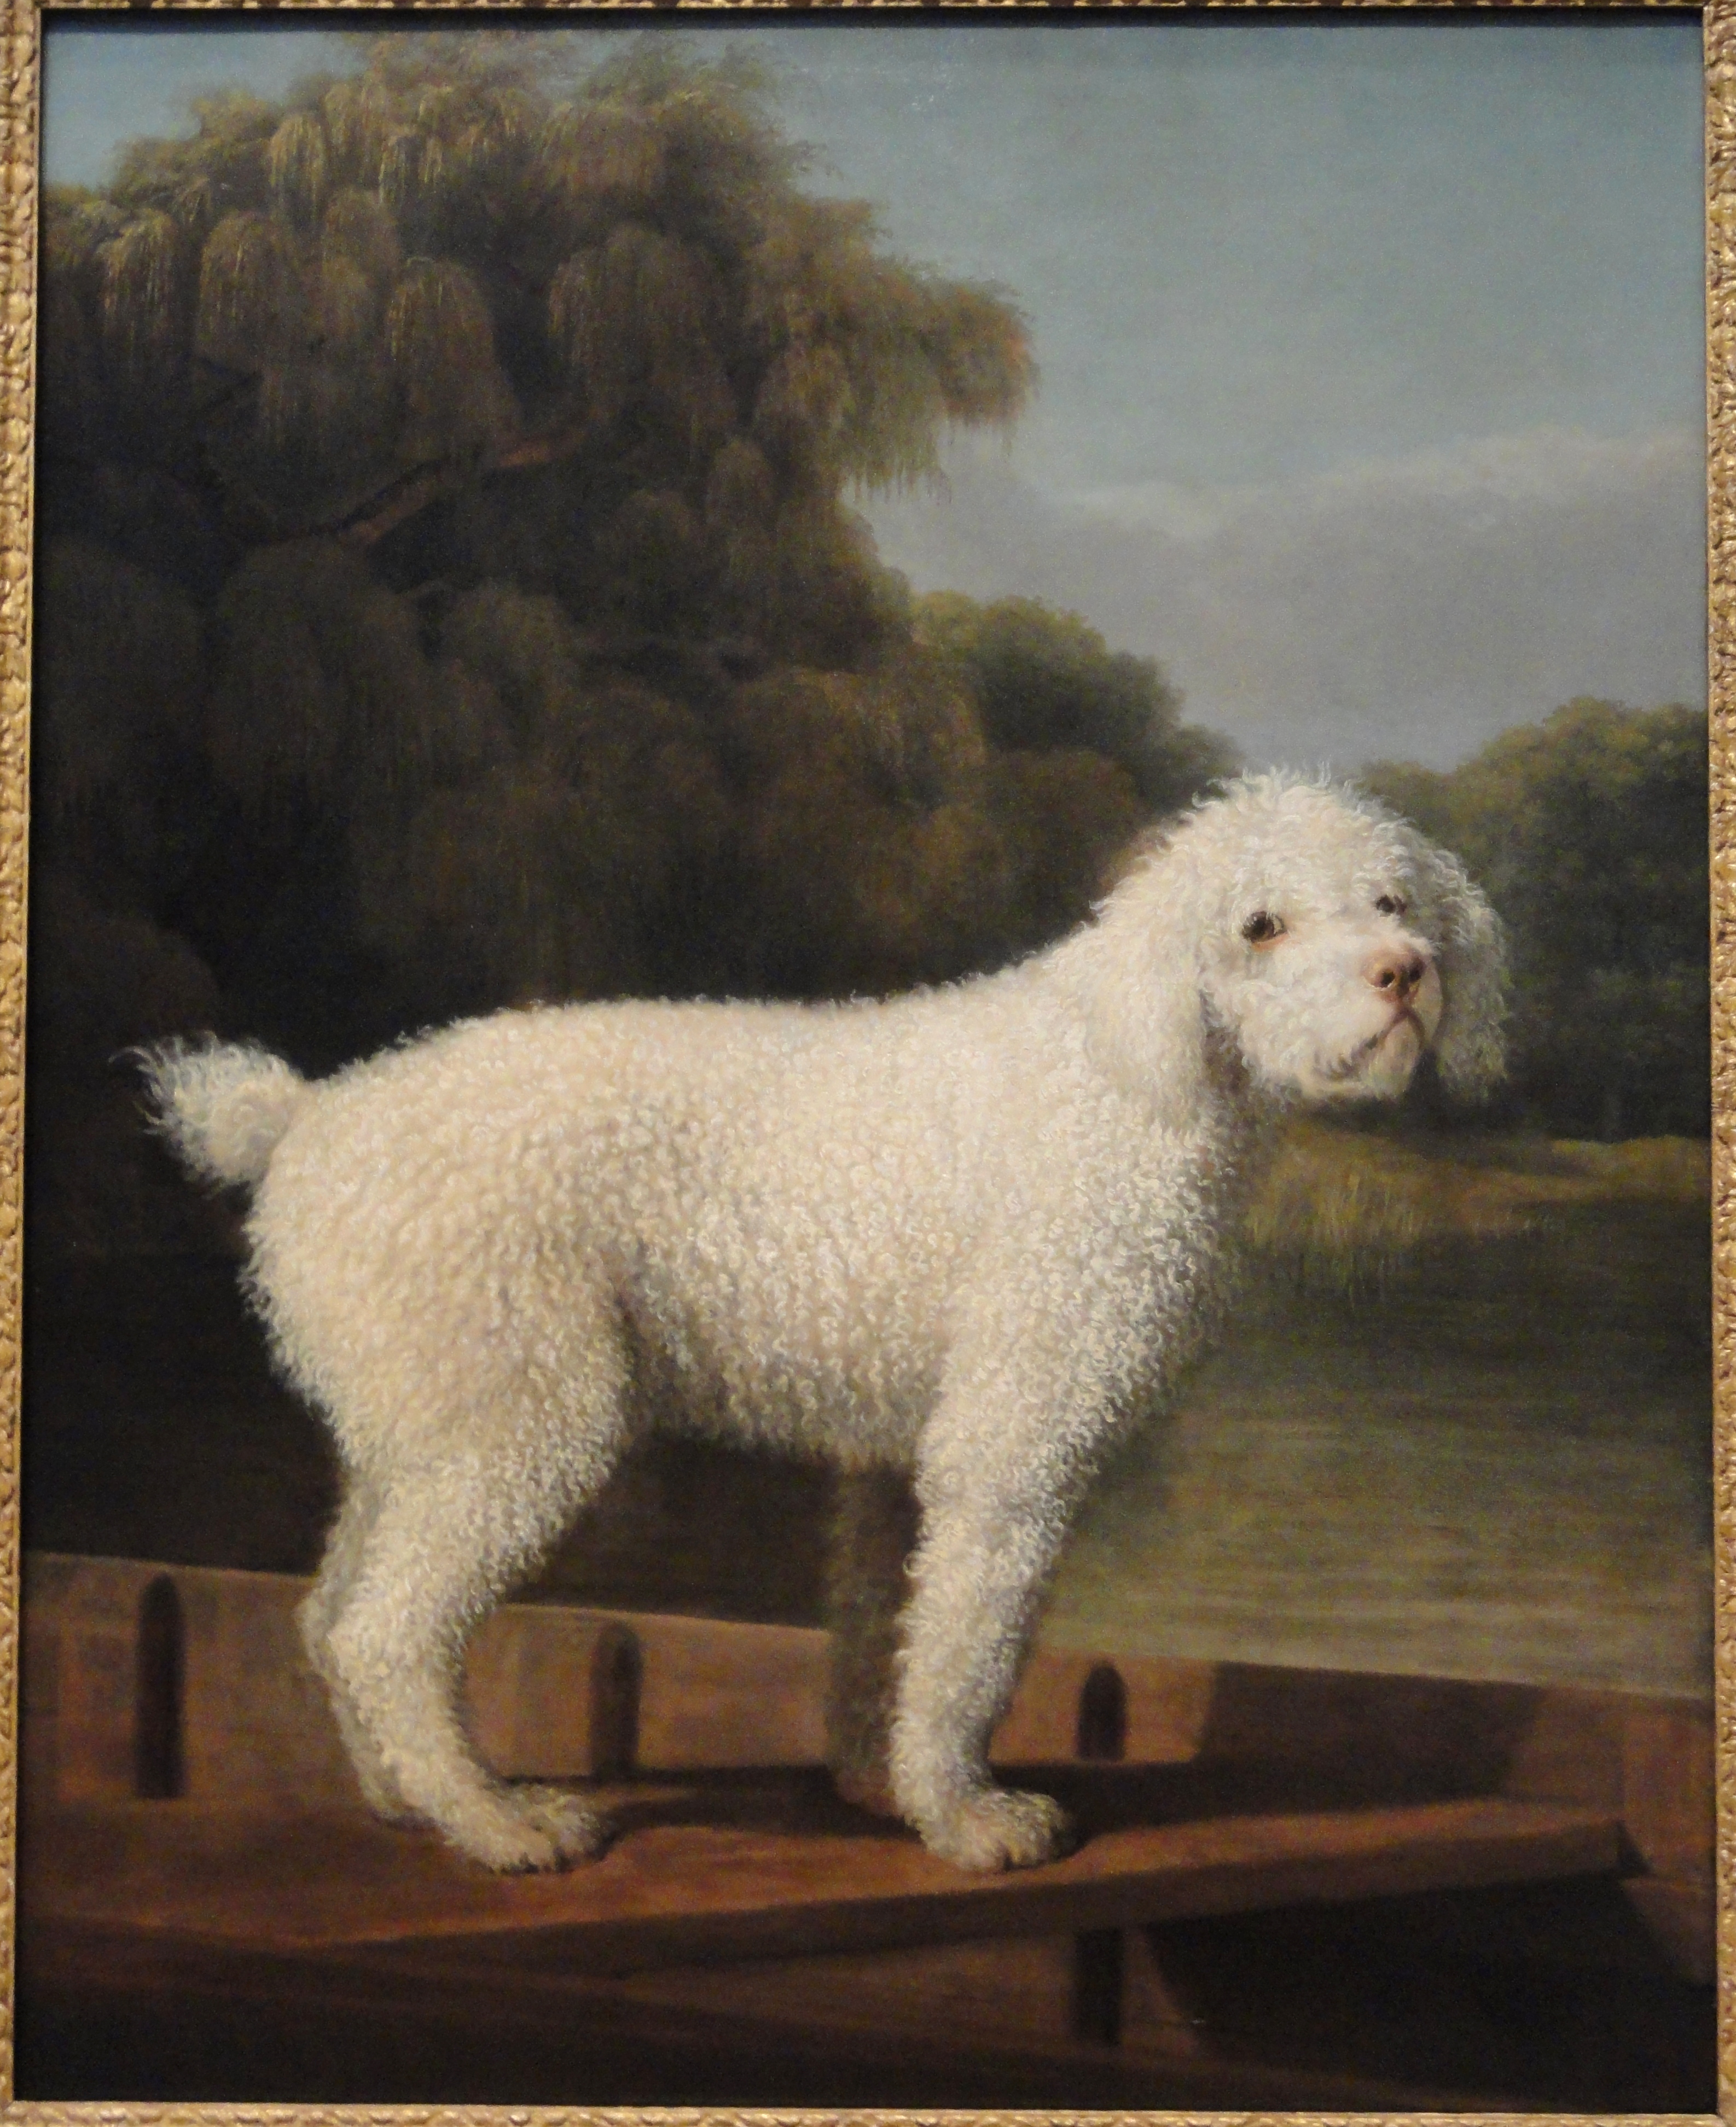 Barboncino bianco su un barchino by George Stubbs - c. 1780 - 50 x 39 in 